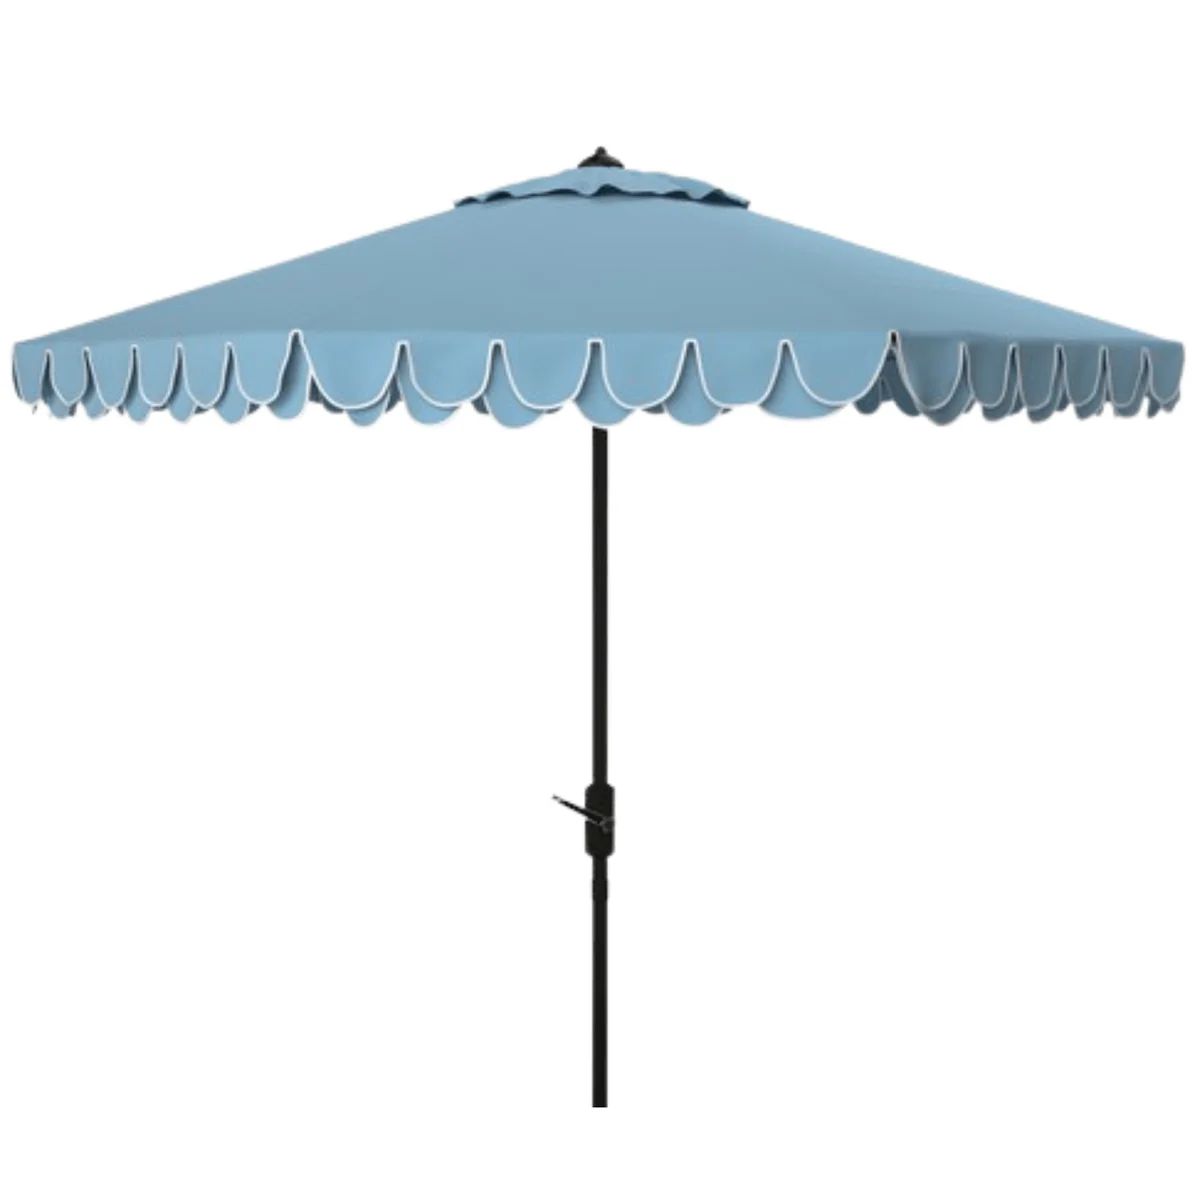 Sky Blue Scalloped Edge Auto Tilt 9' Outdoor Patio Umbrella | The Well Appointed House, LLC